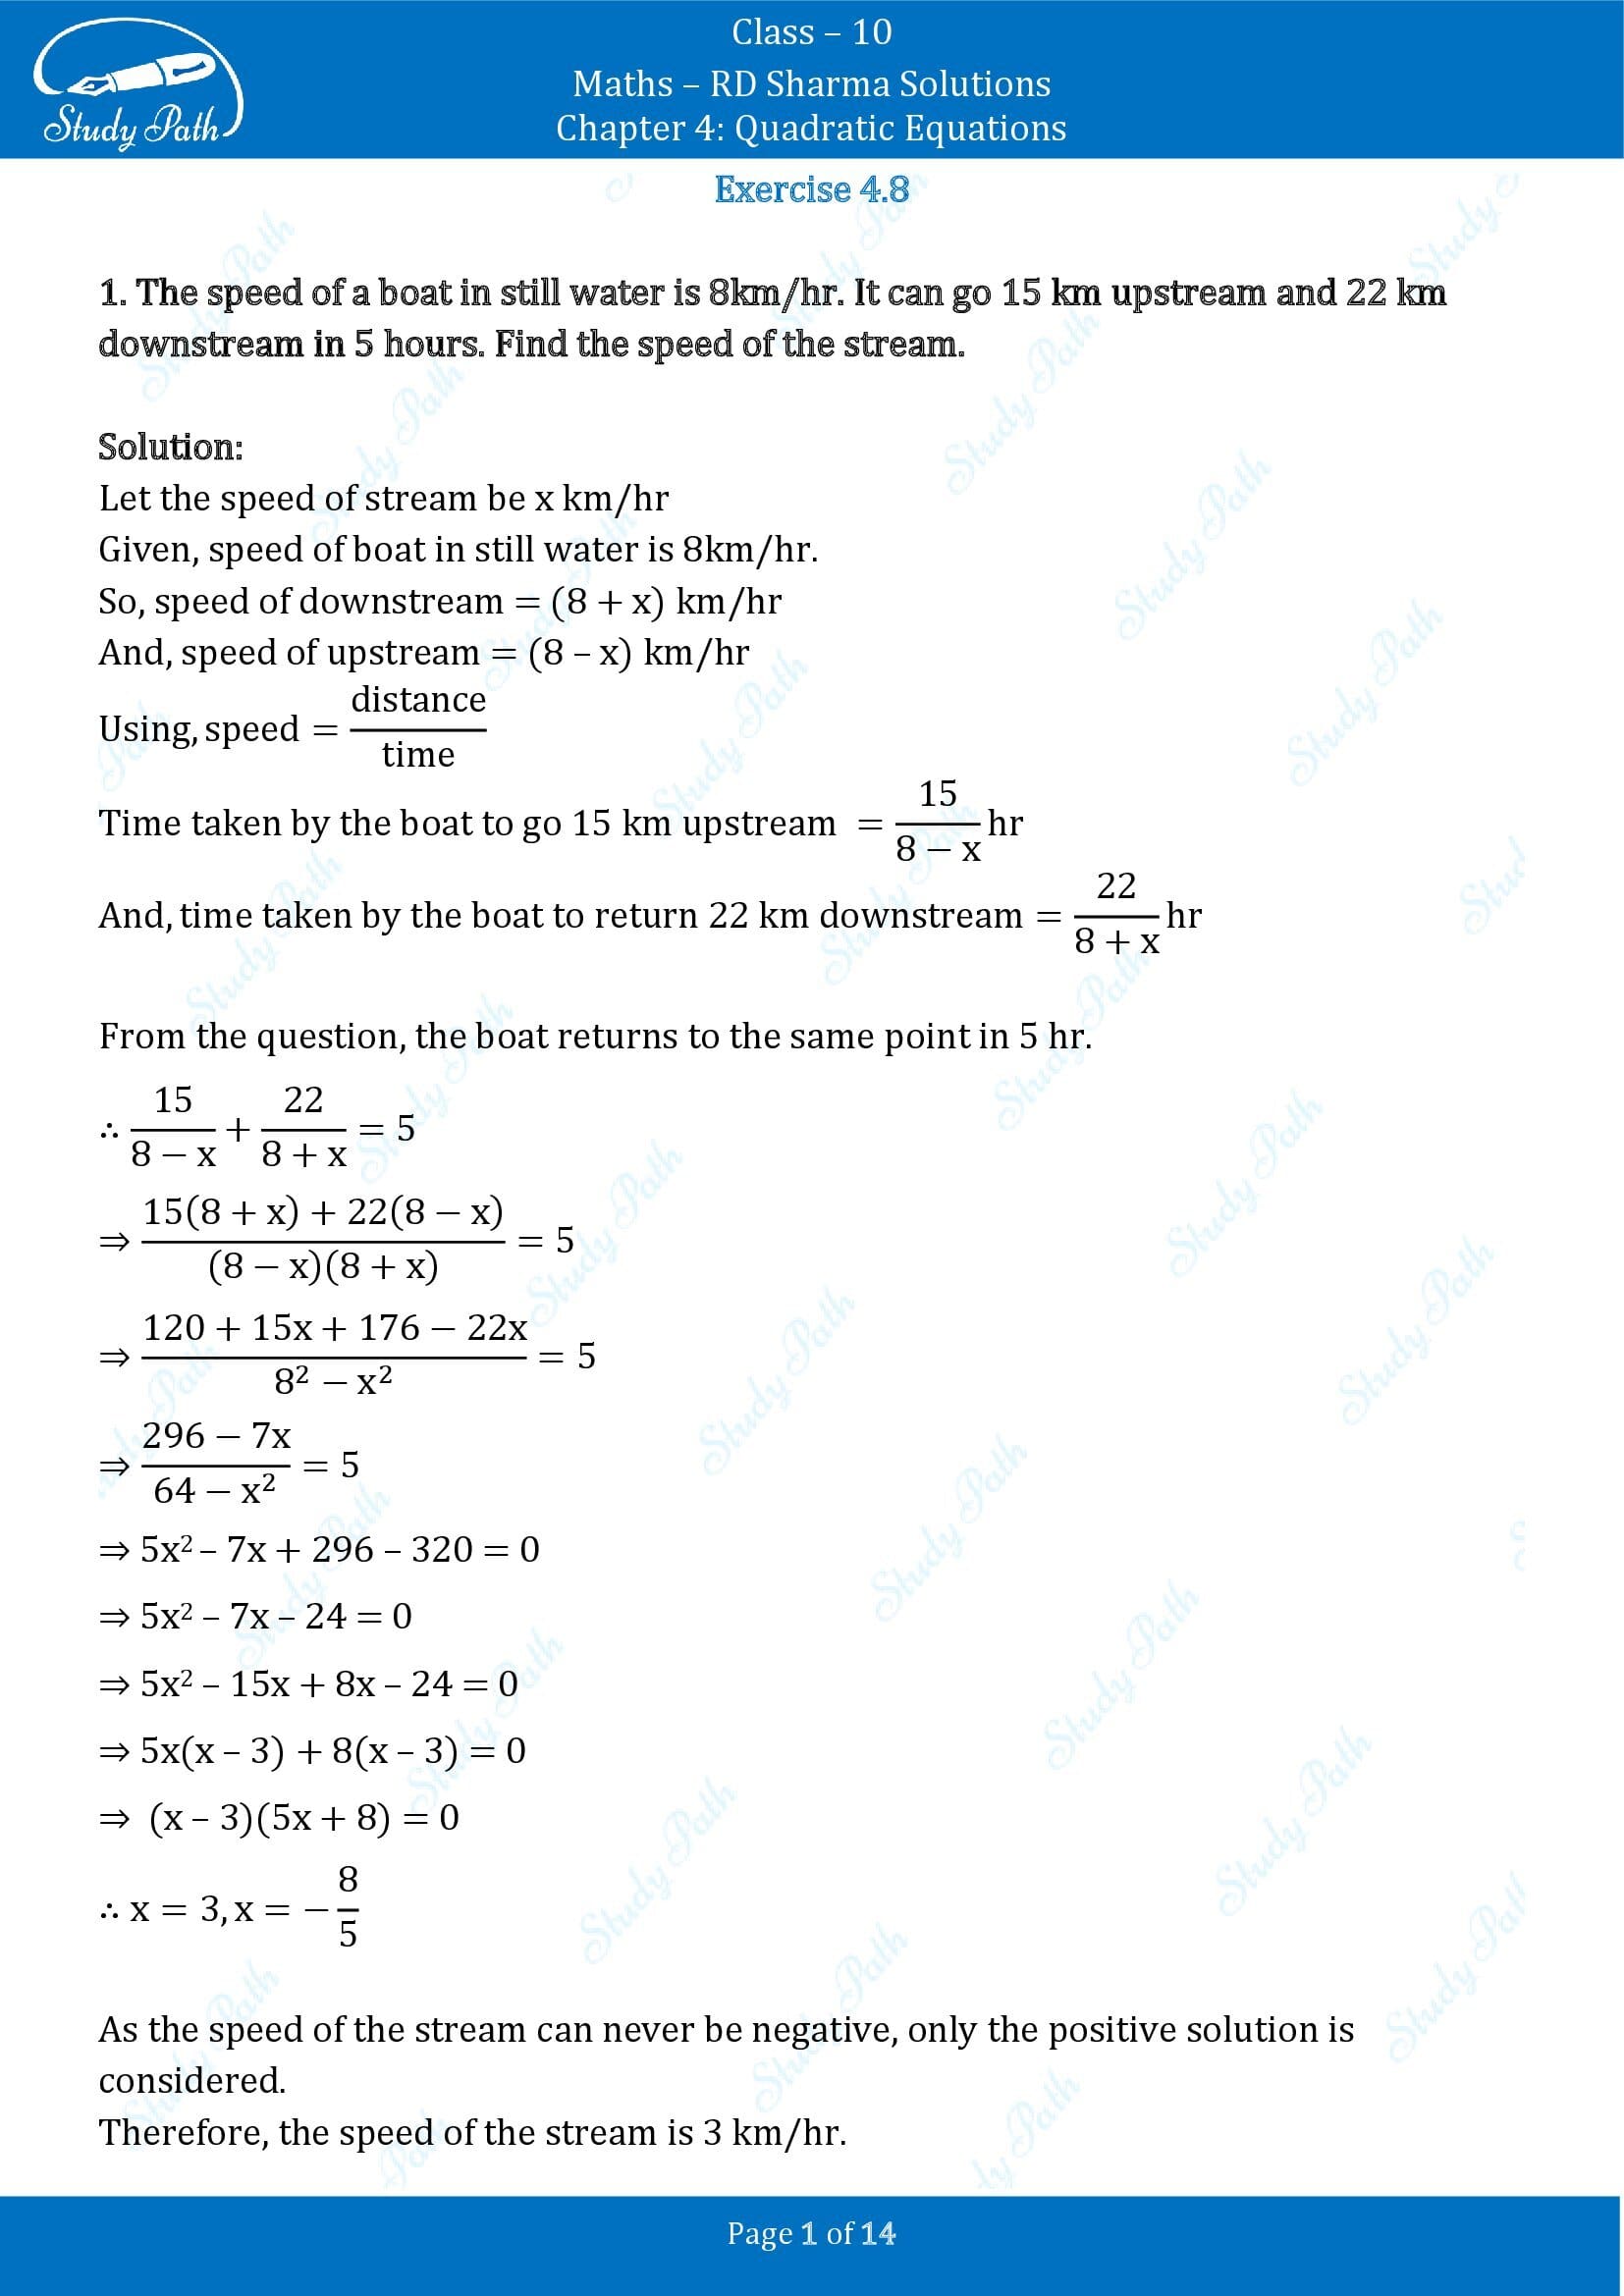 RD Sharma Solutions Class 10 Chapter 4 Quadratic Equations Exercise 4.8 00001